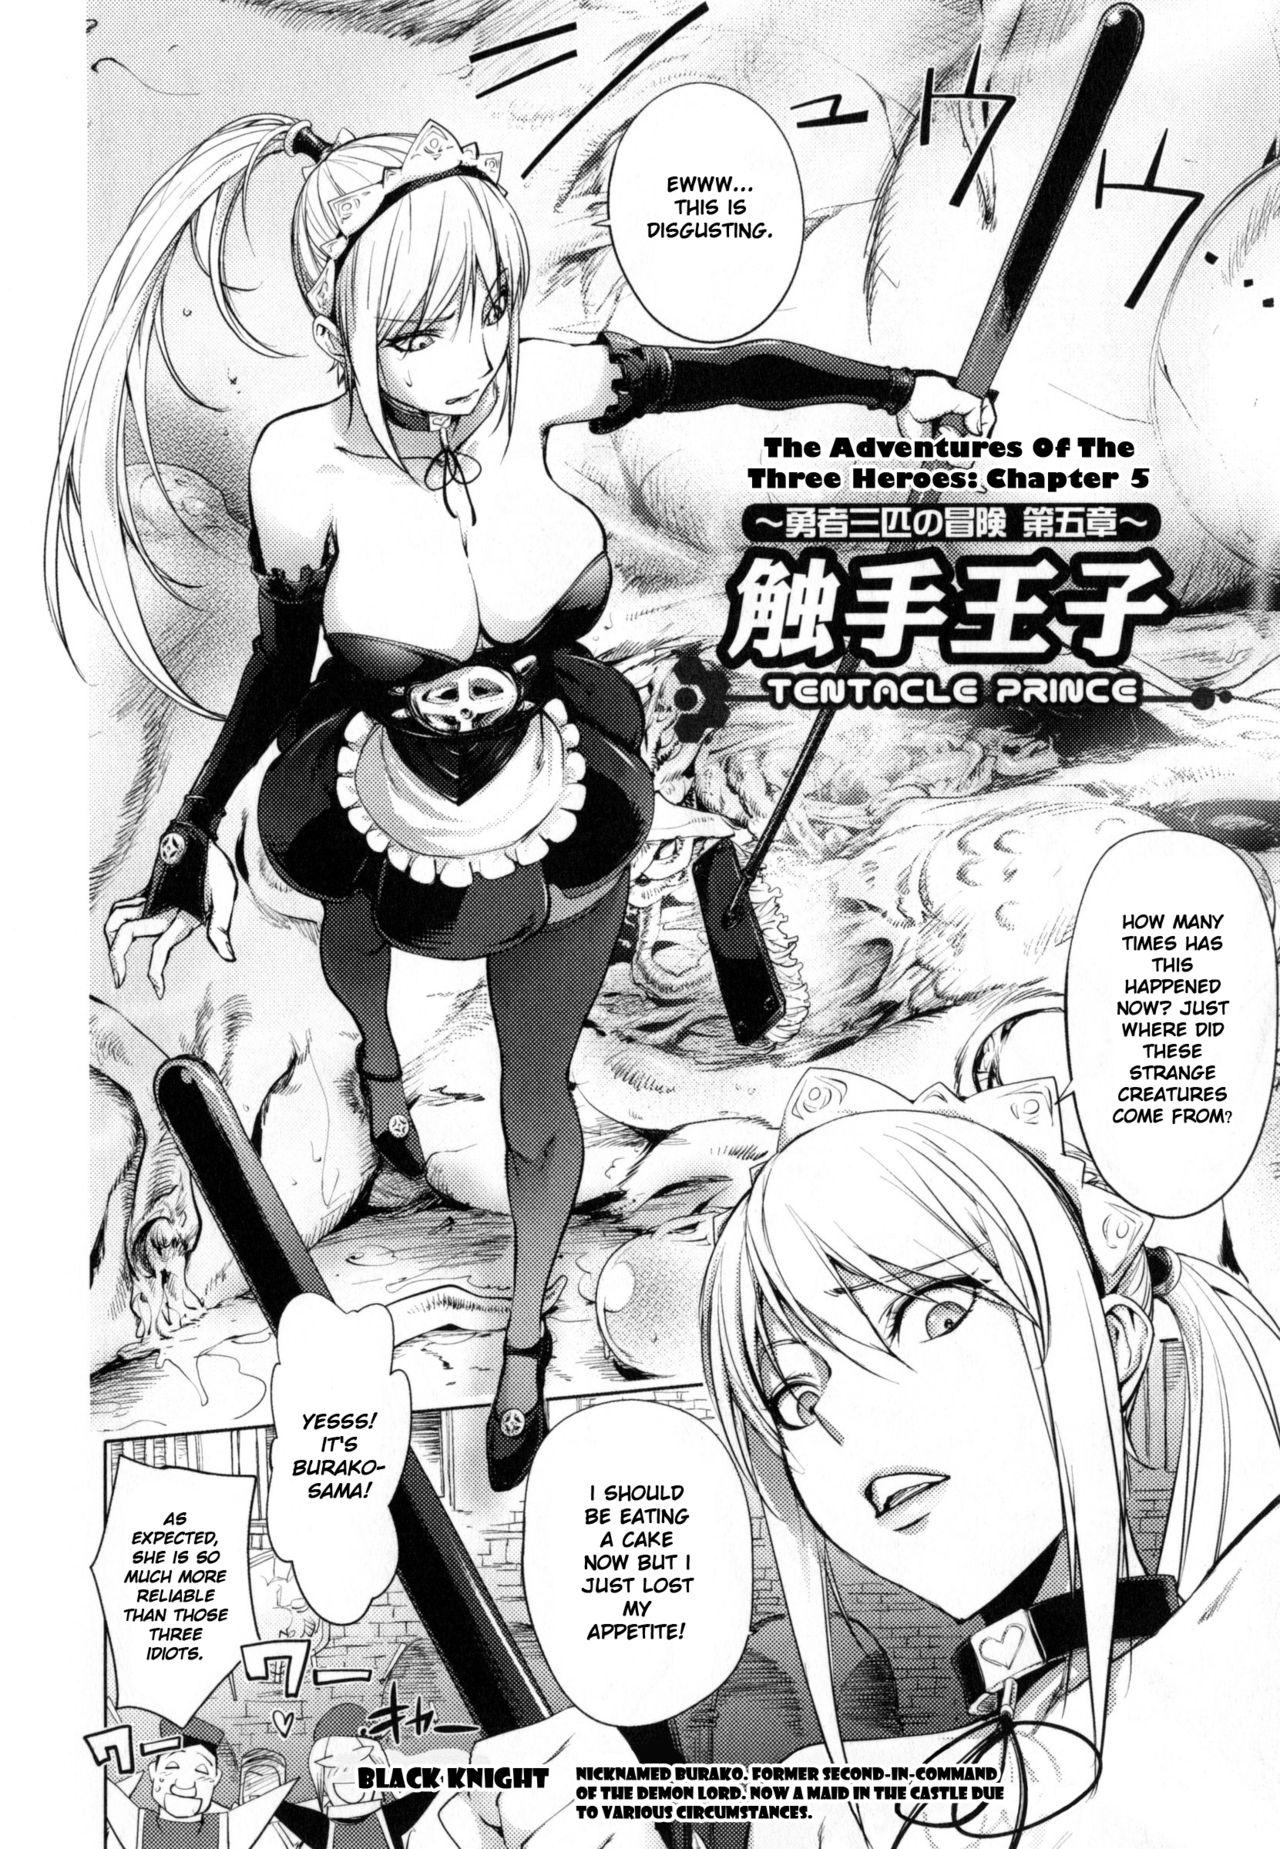 Pickup Shokushu Ouji | The Adventures Of The Three Heroes: Chapter 5 - The Tentacle Prince Real Amateur Porn - Page 2